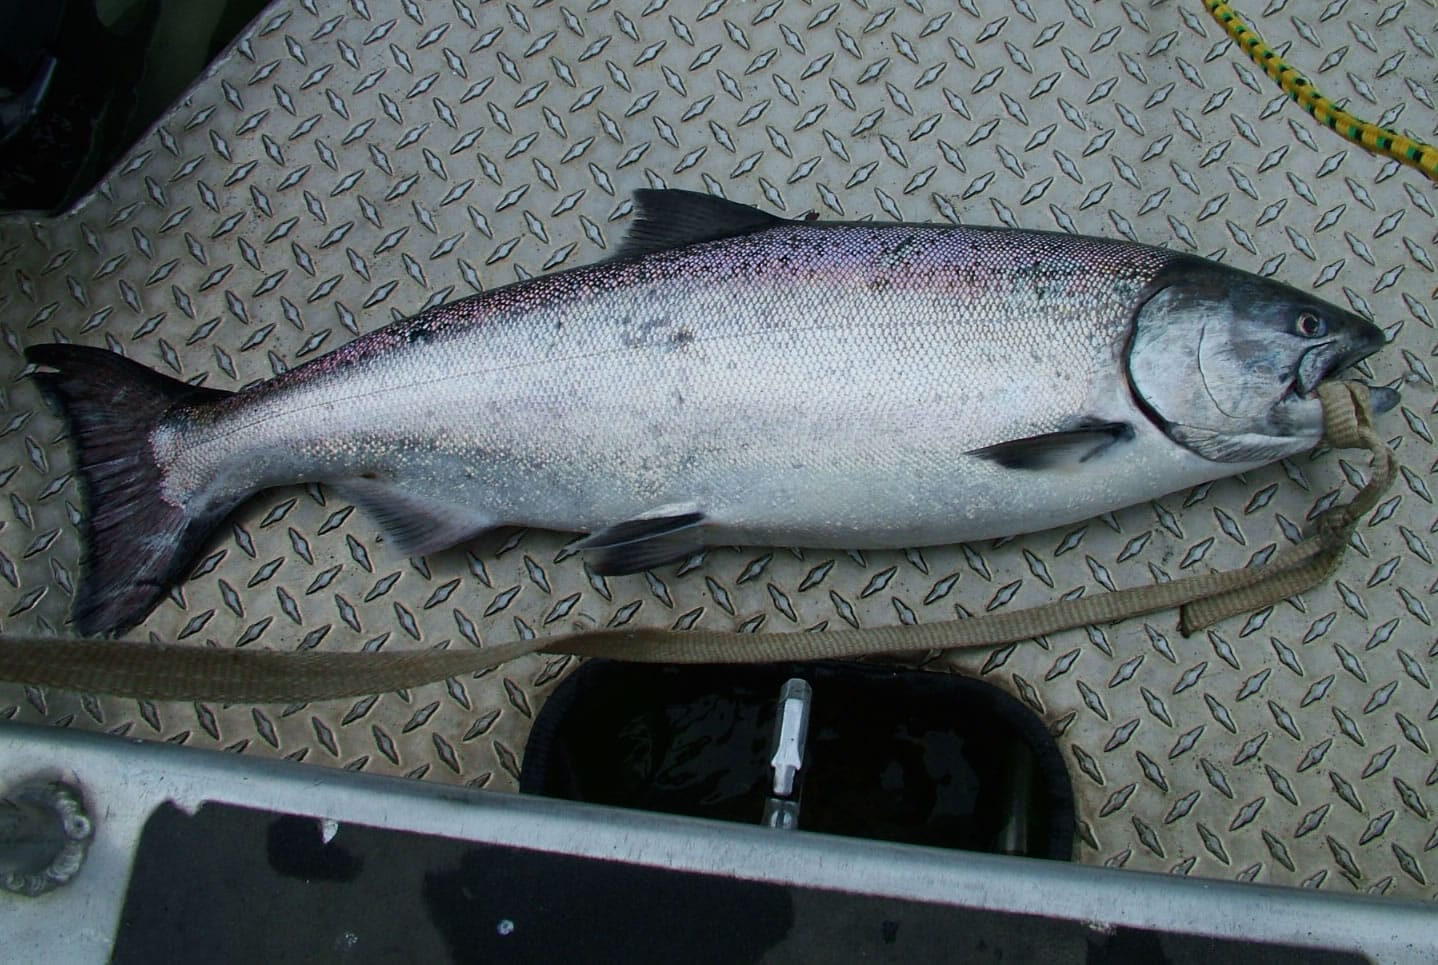 Anglers caught just 41 spring chinook salmon between March 1 and 19 in the lower Columbia River, according to Washington and Oregon estimates.